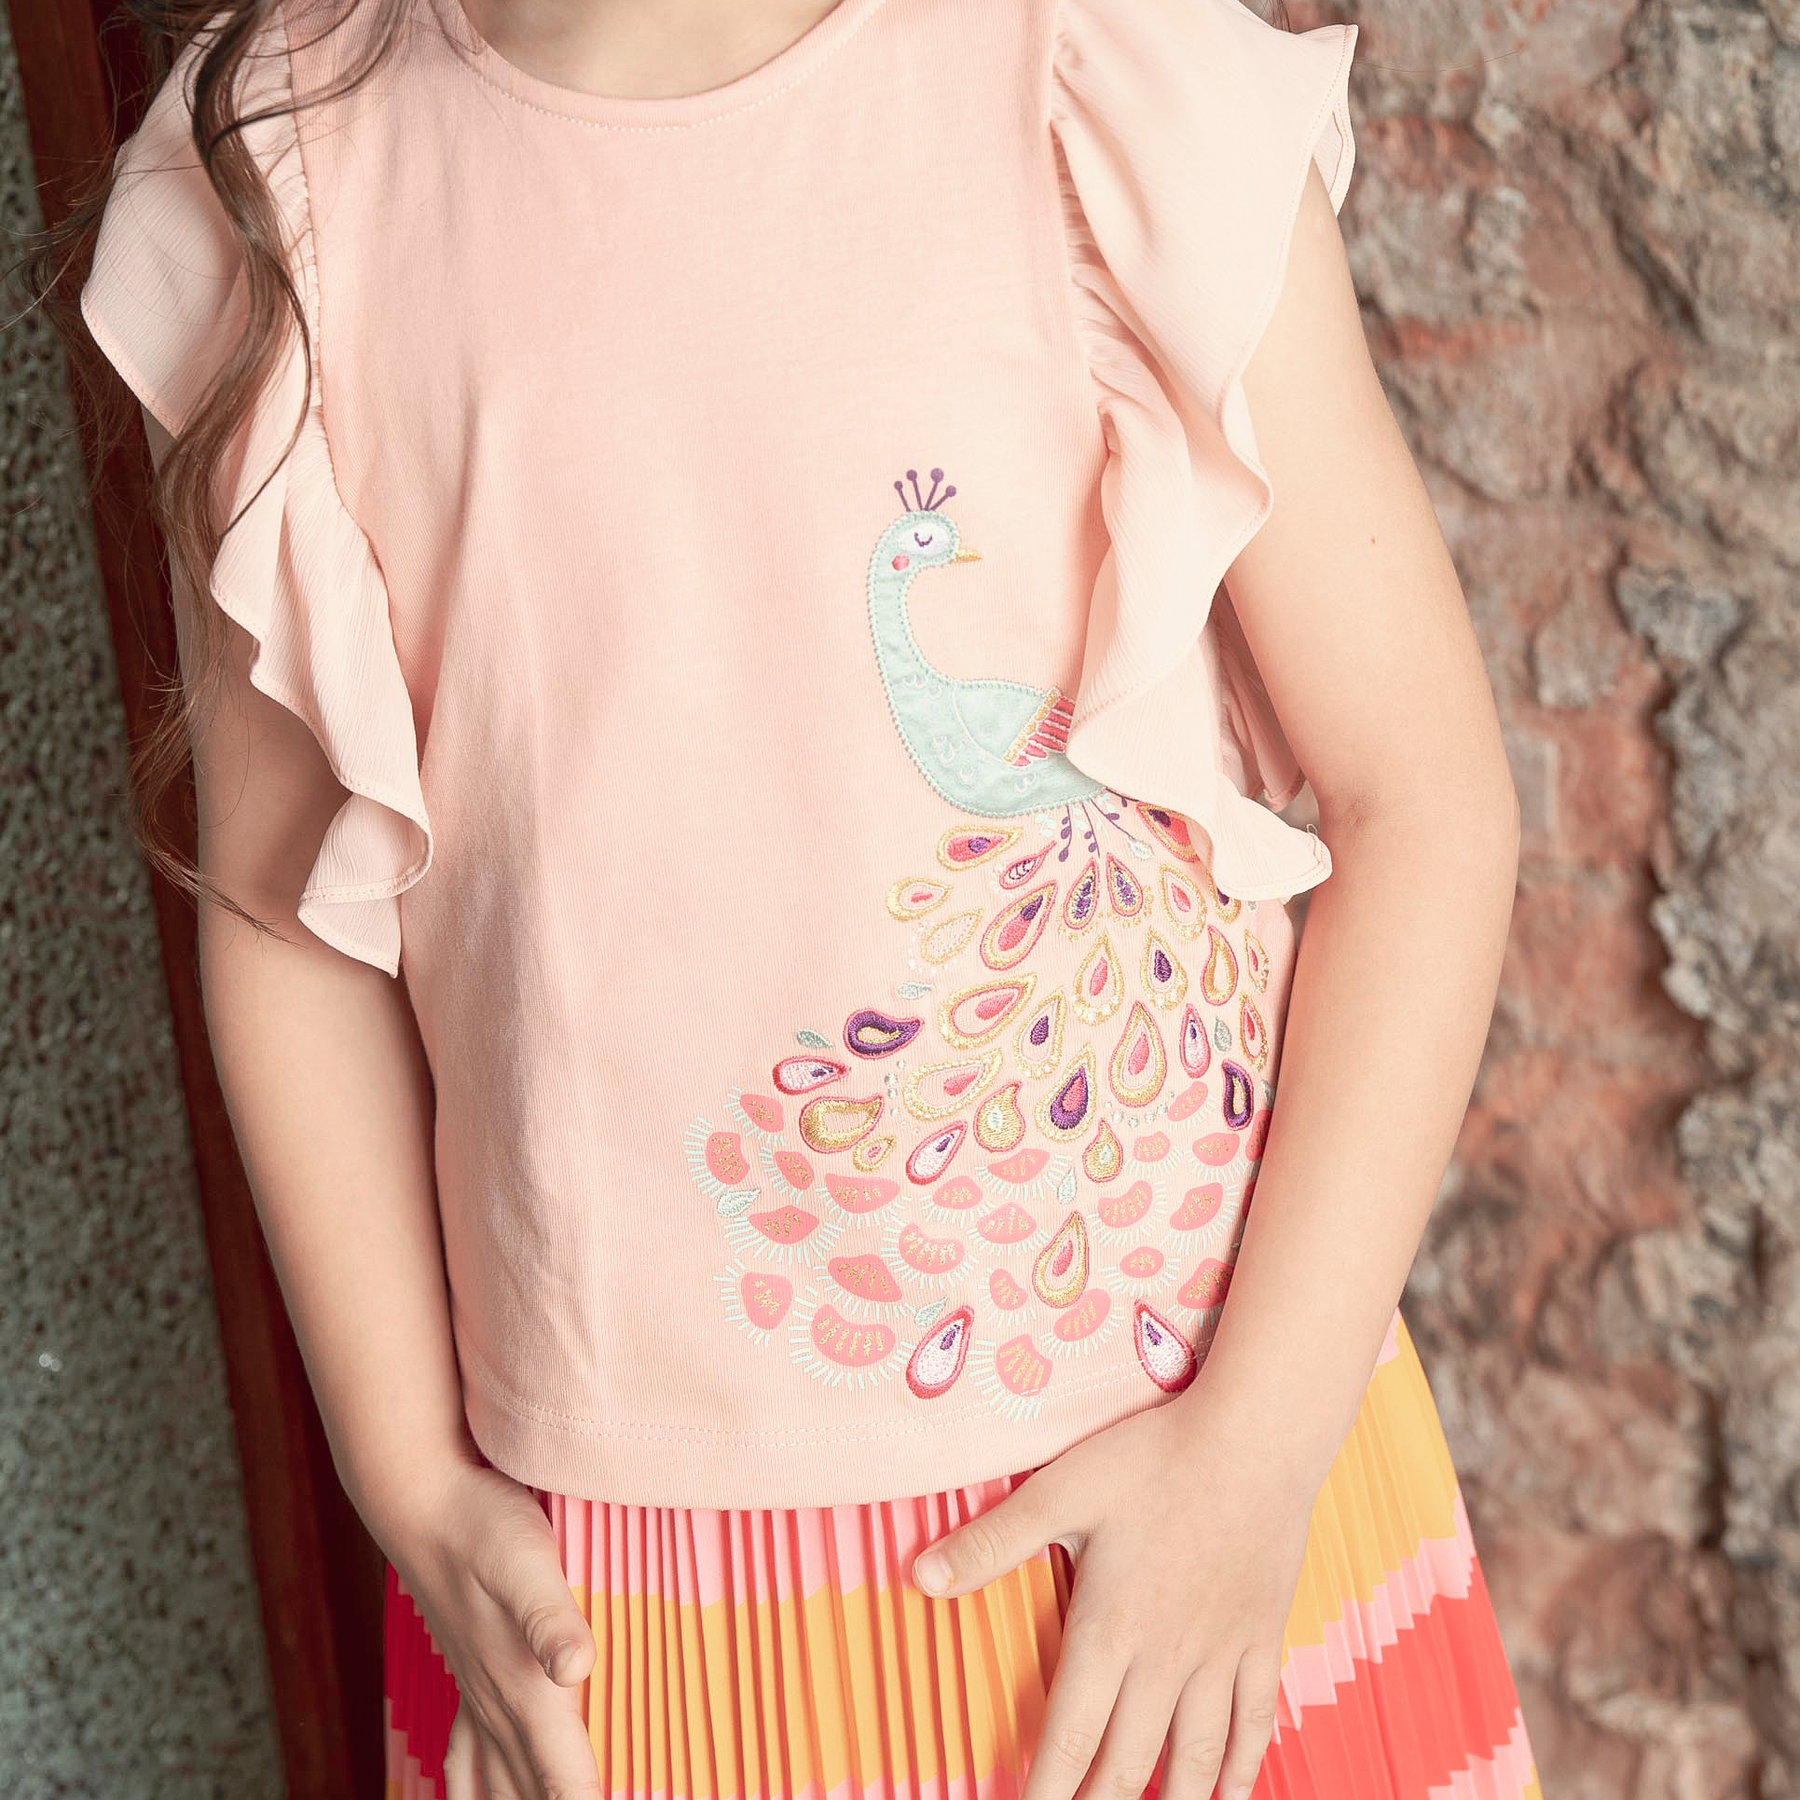 <tc>Light coral kids top with ruffle sleeves and peacock appliqué</tc>